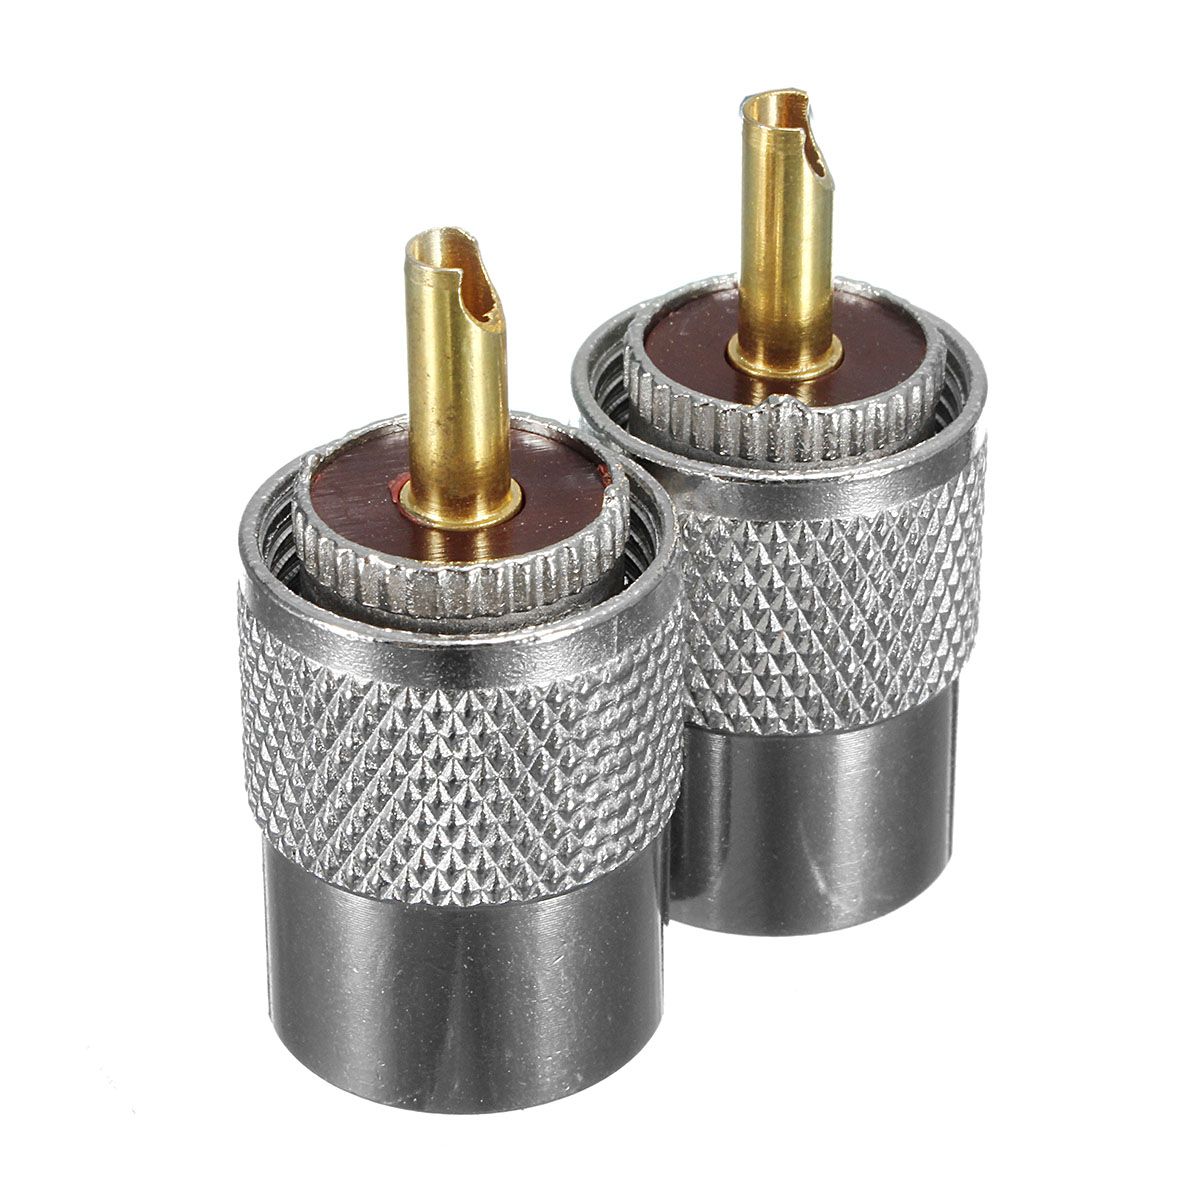 2Pcs-Metal-UHF-PL-259-Male-Solder-RF-Connector-Plug-For-RG8-Coaxial-Cable-Connector-1161334